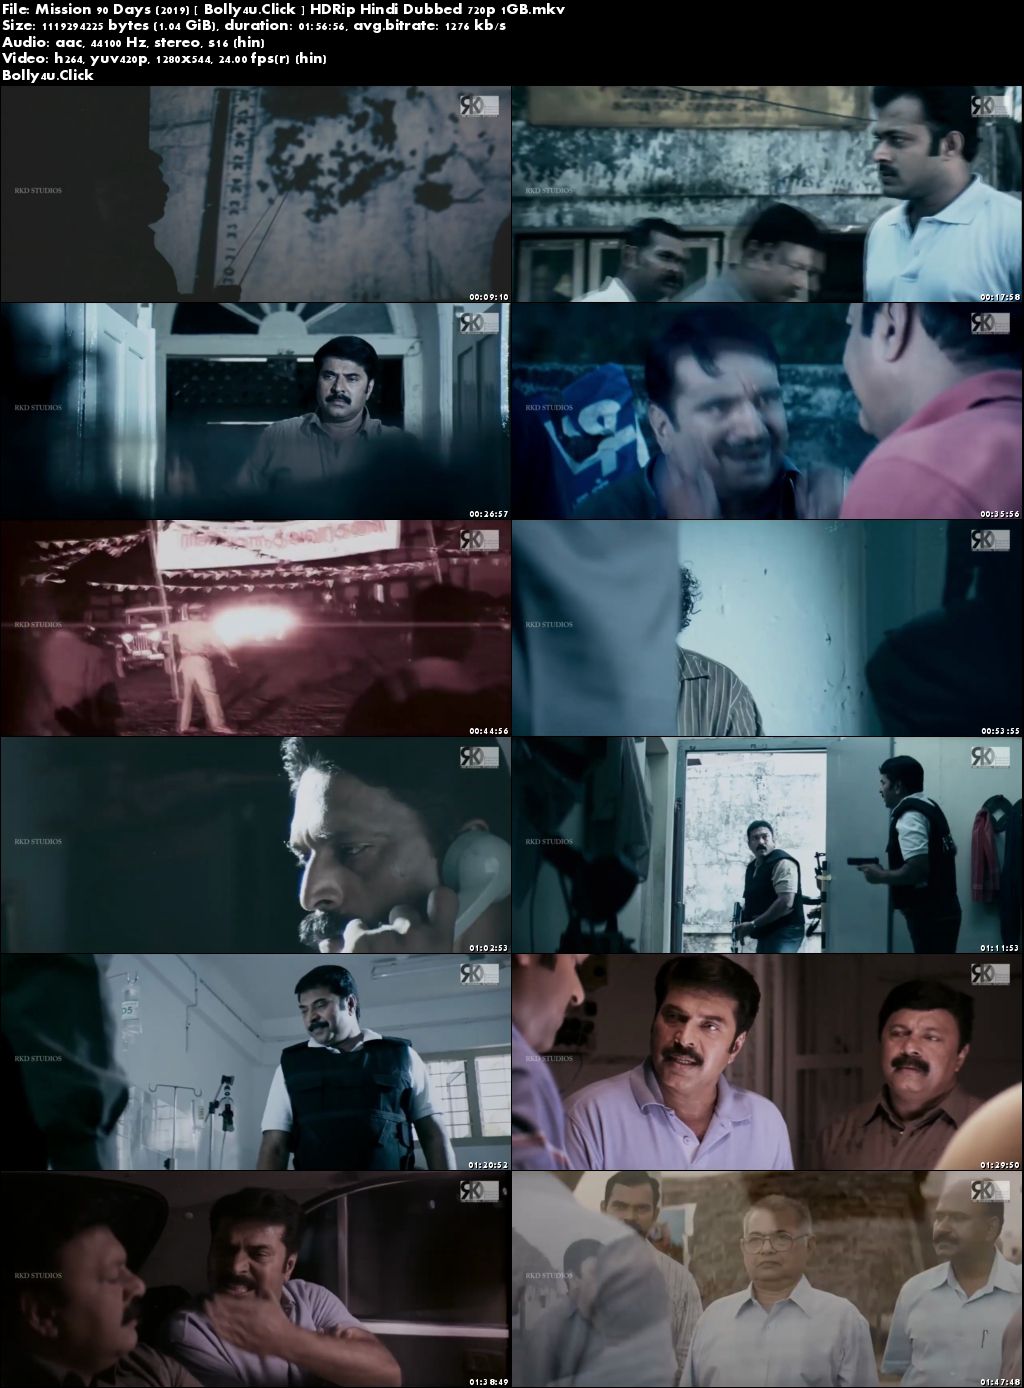 Mission 90 Days 2019 HDRip 1GB Hindi Dubbed 720p Download